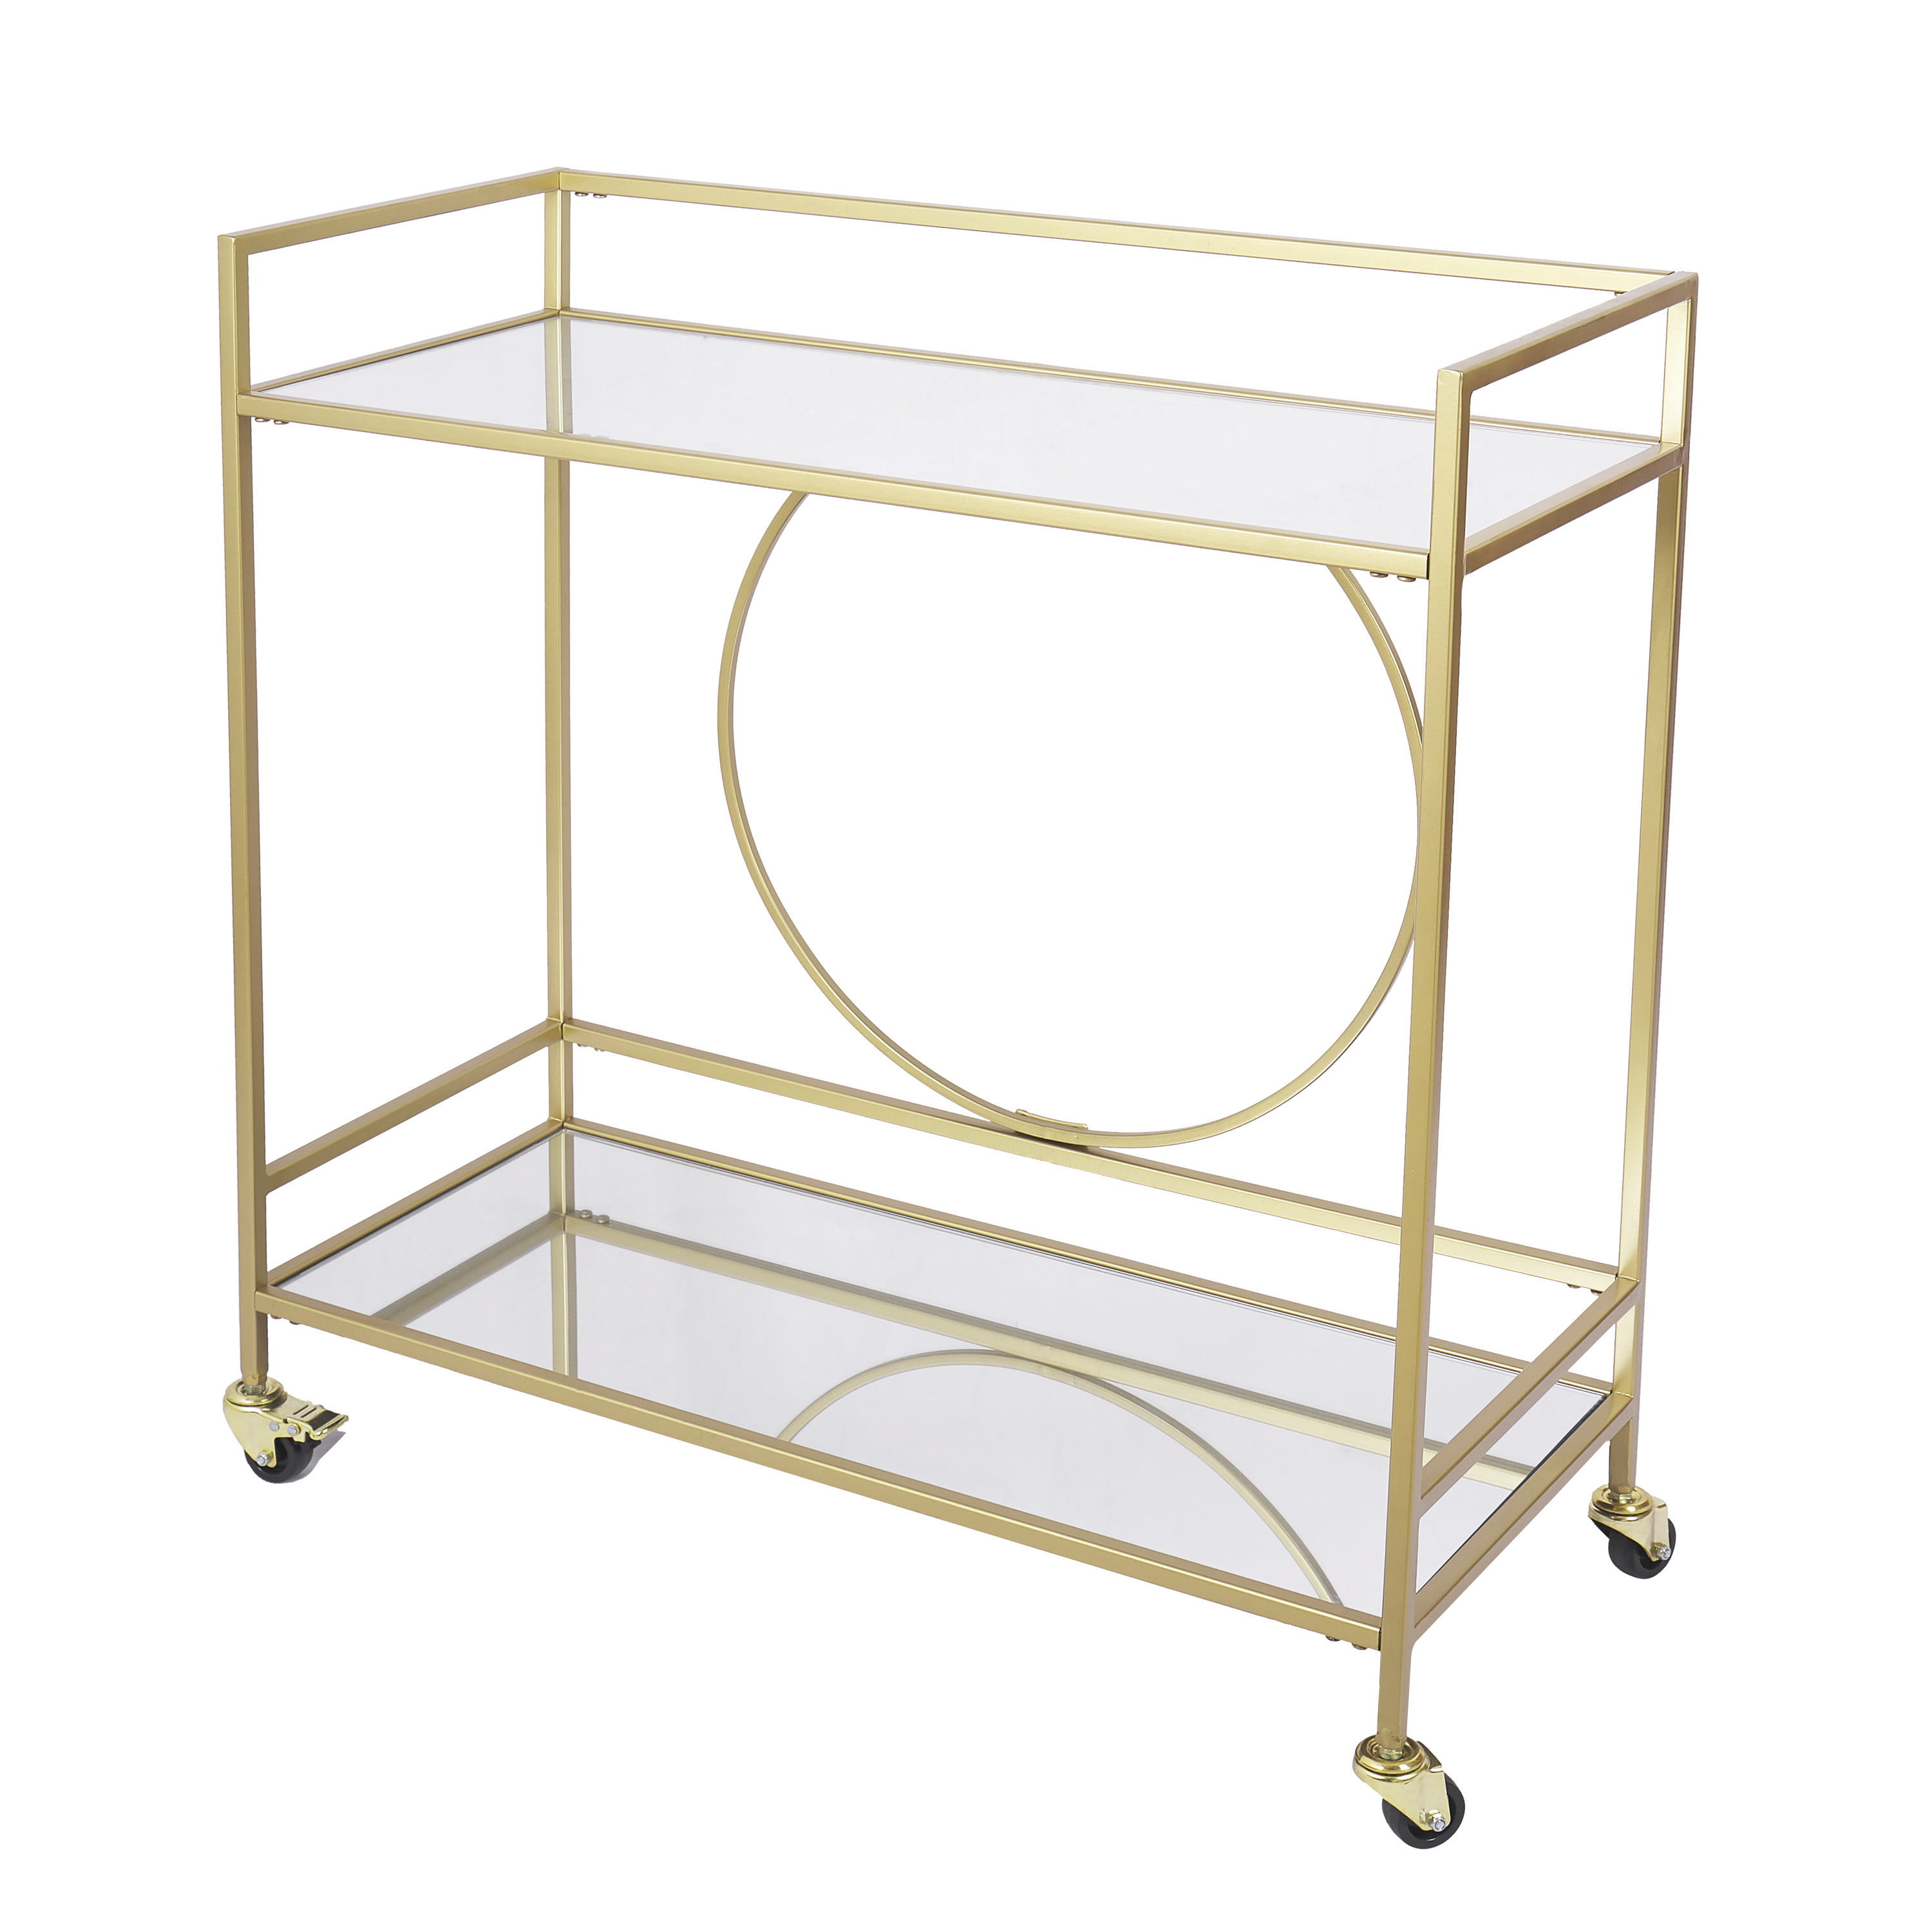 VEVOR Bar Cart with 2 Mirrored Shelves,36 L x 15 W x 36.6 H Gold Bar Cart with Lockable Casters and Handle for Home Kitchen Club